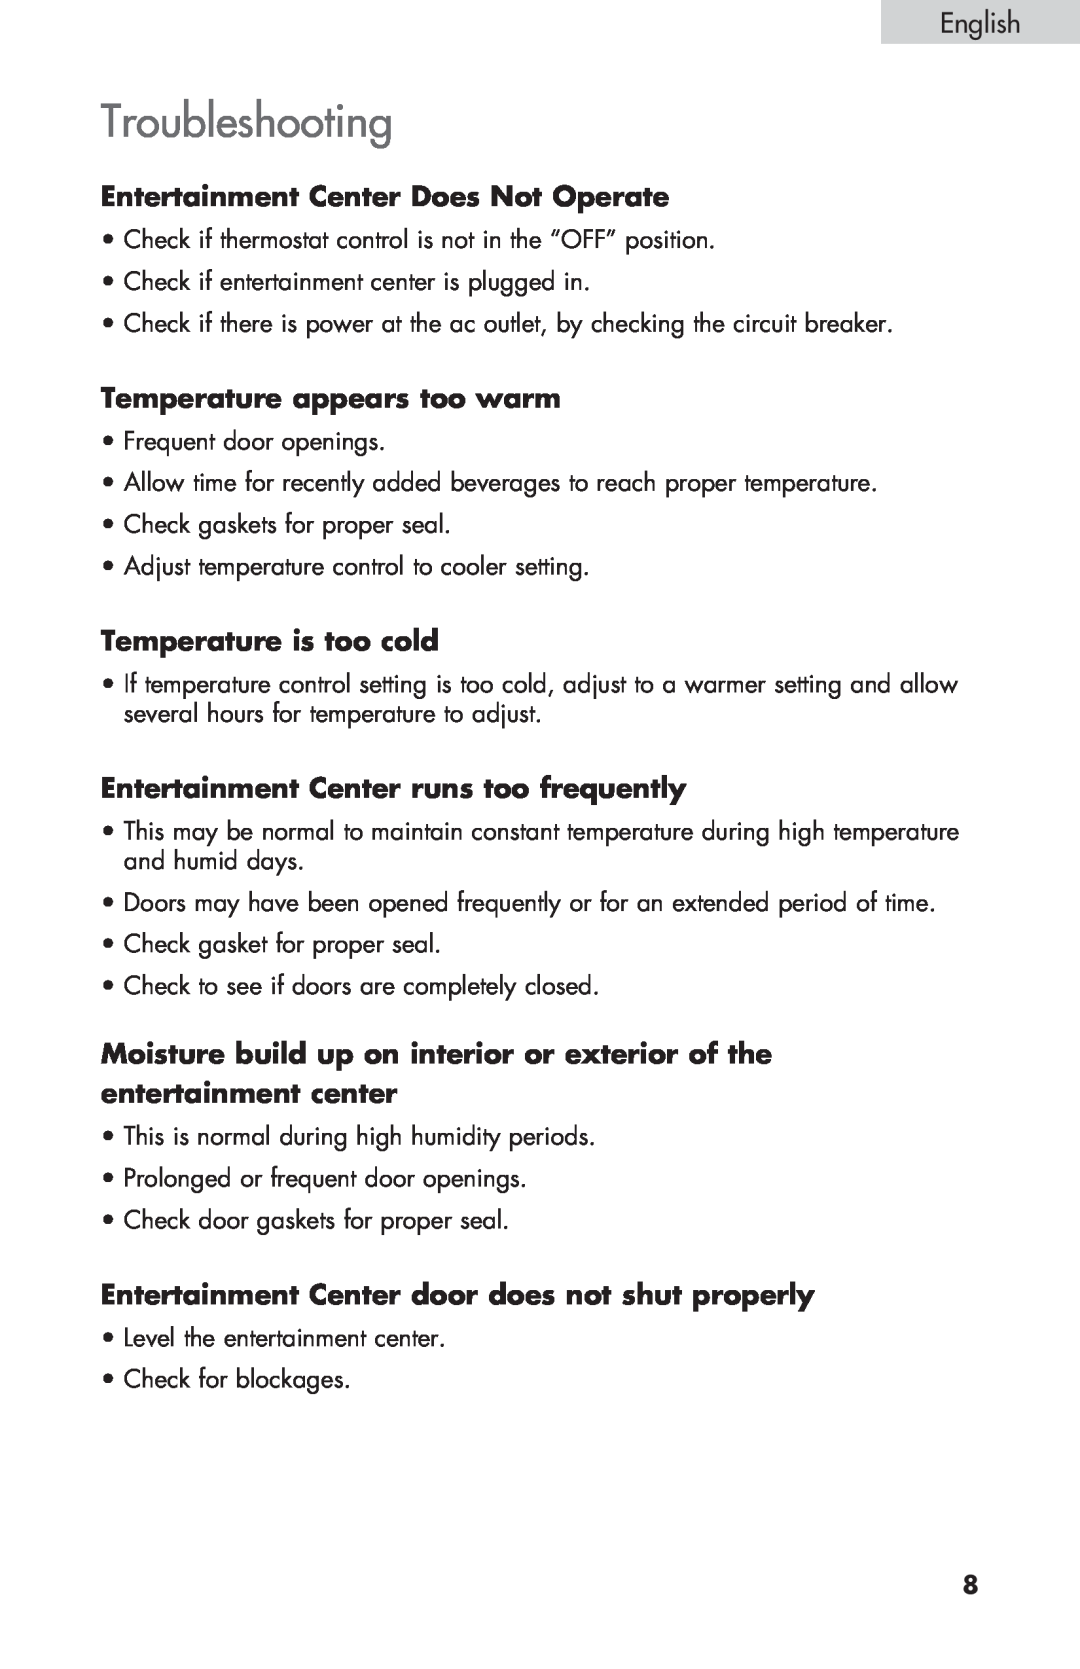 Haier HBCN05FVS user manual Troubleshooting, Entertainment Center Does Not Operate, Temperature appears too warm, English 